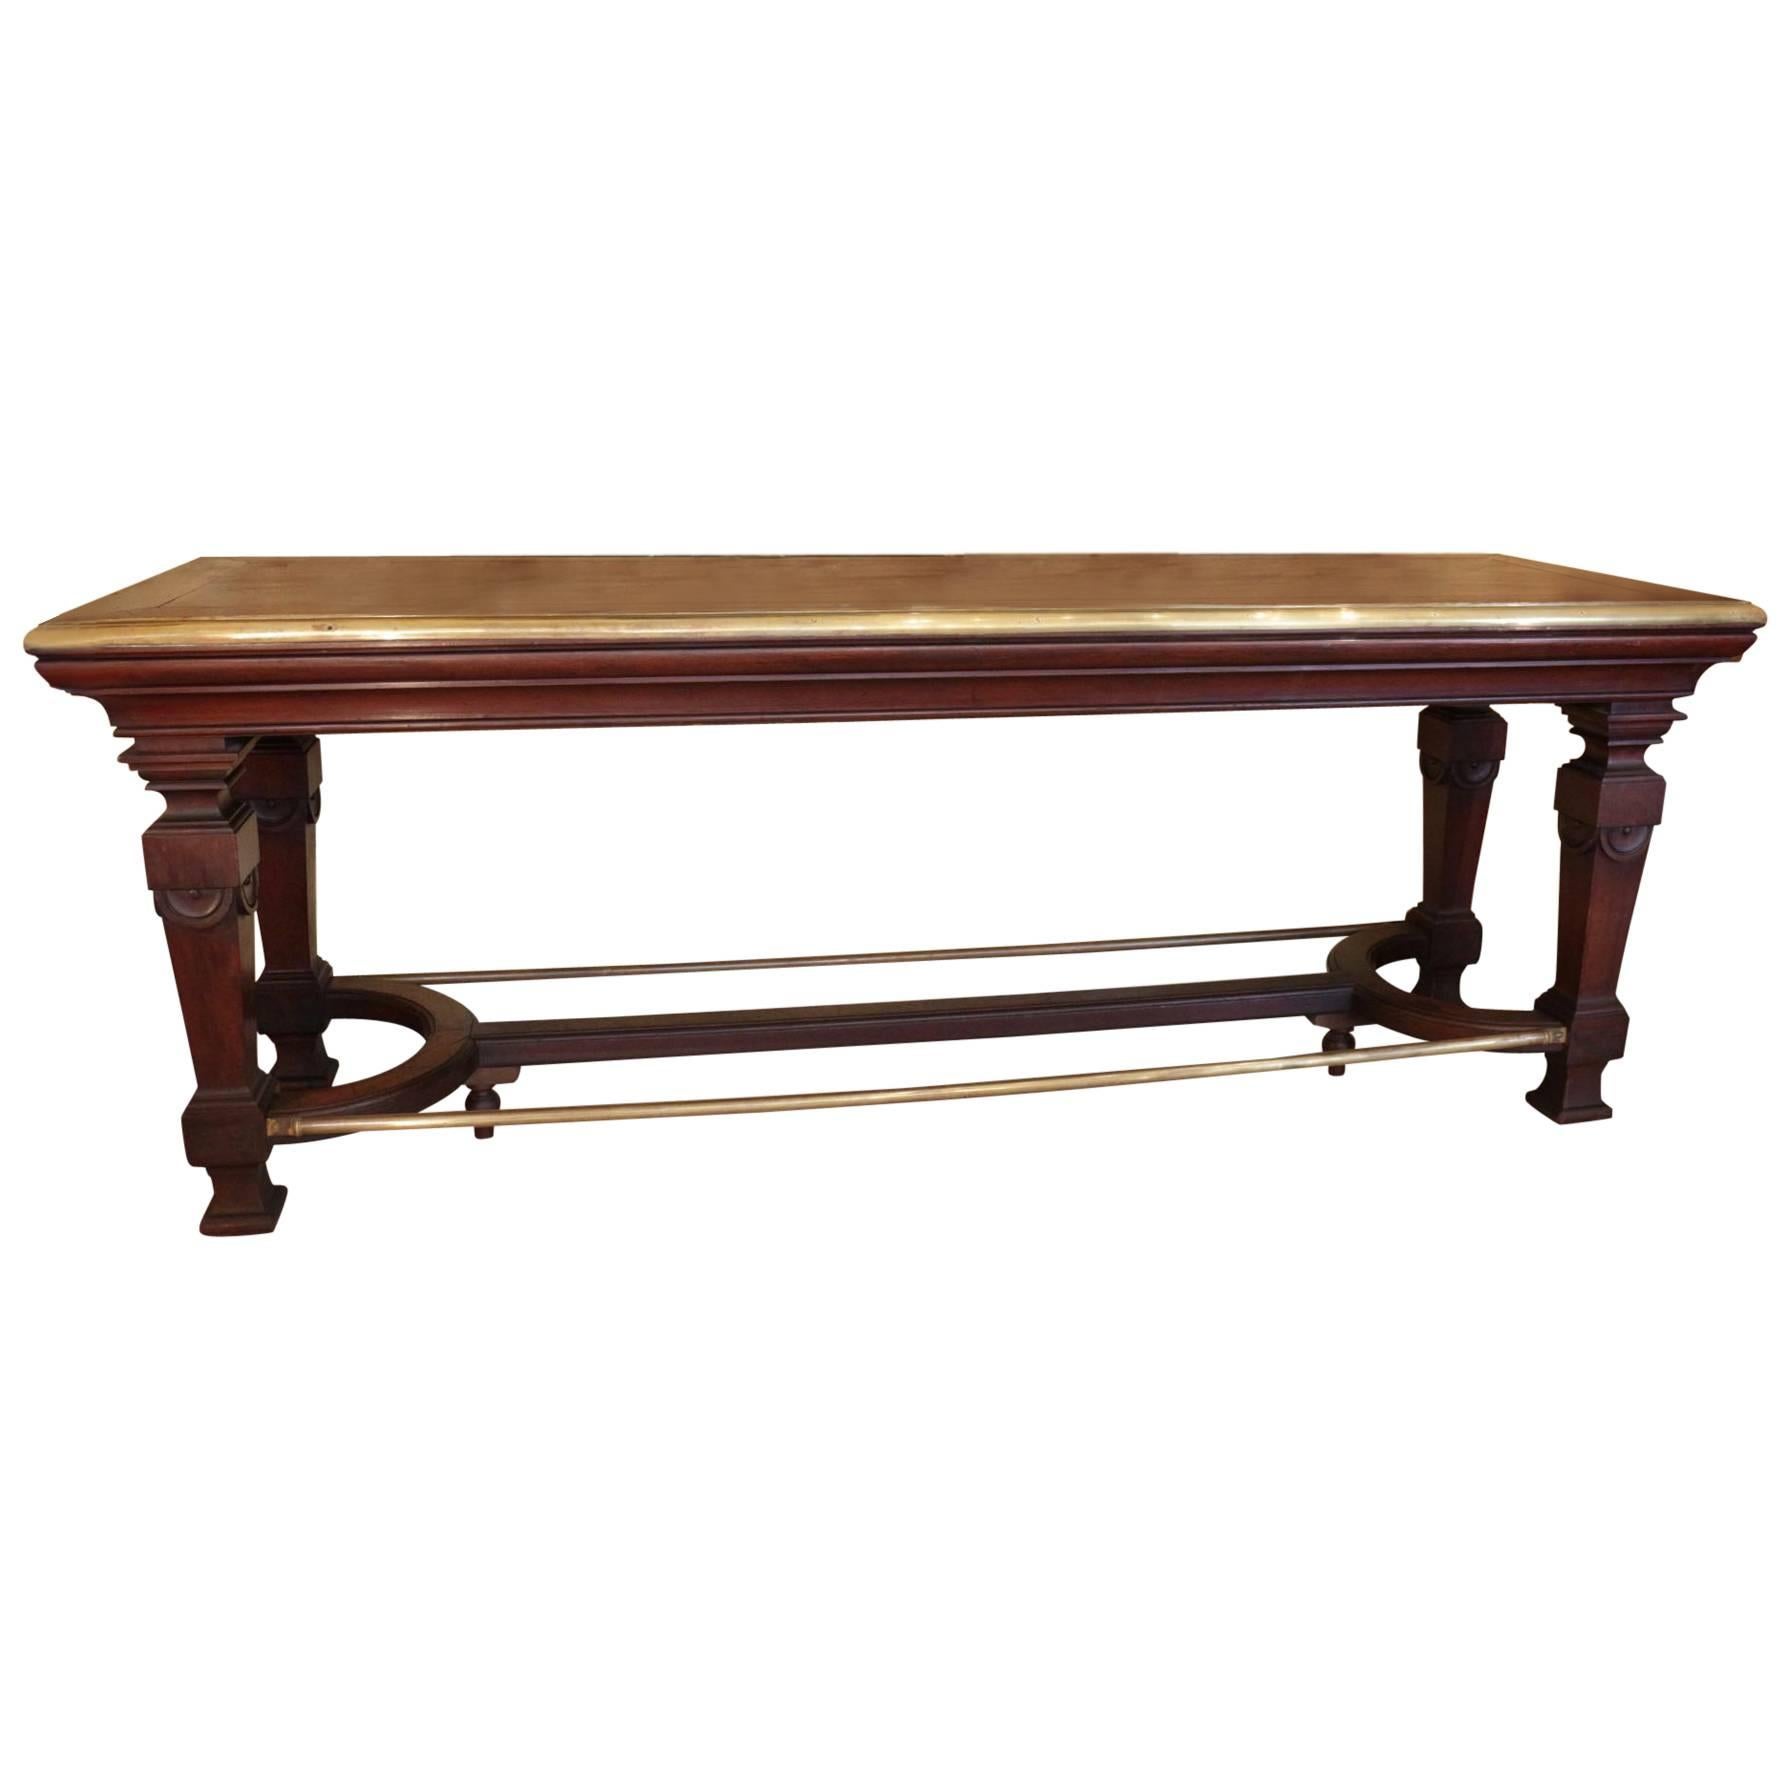 Mahogany and Brass Longue Atmosphere Centre Bistro Table